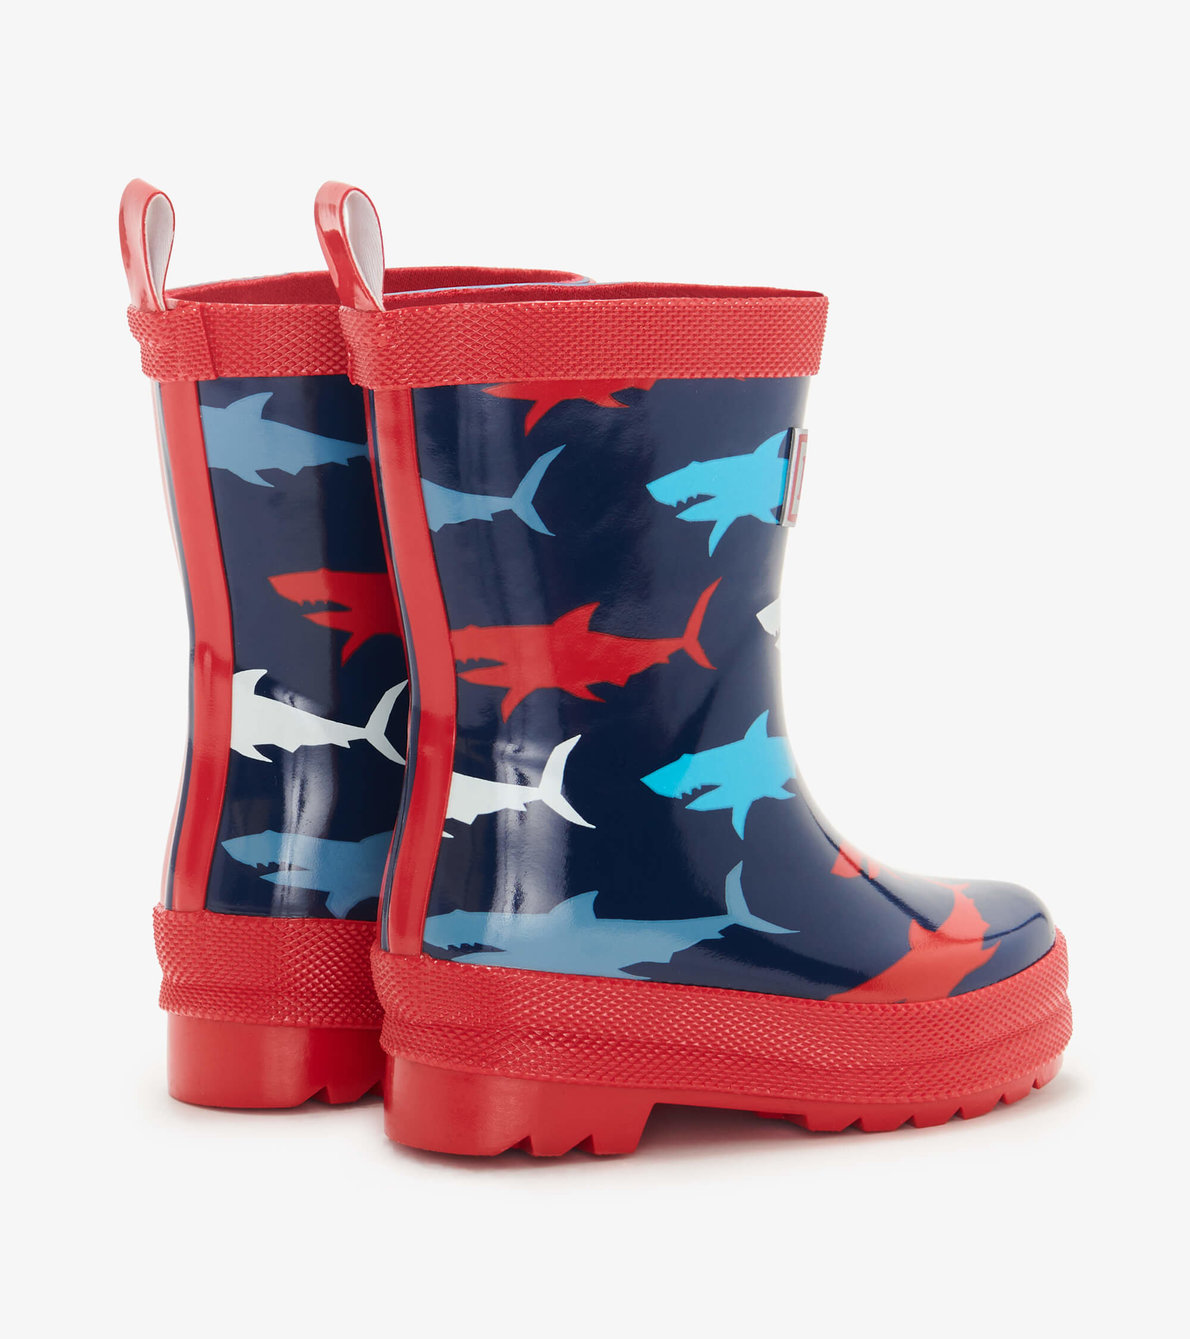 View larger image of My 1st Rain Boots - Hungry Sharks